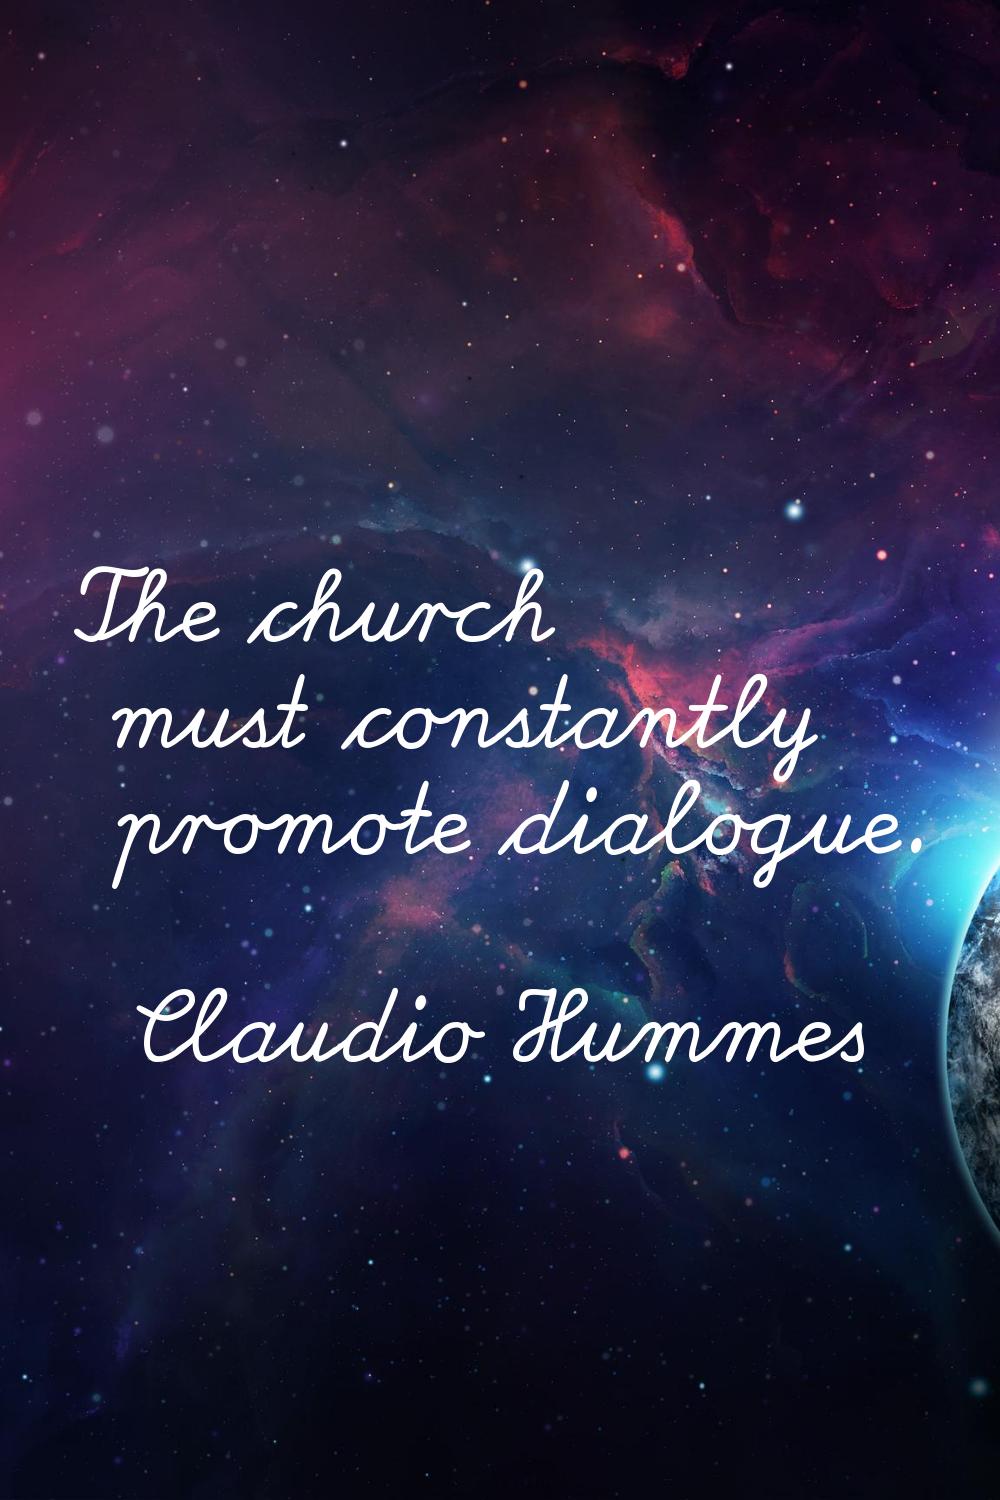 The church must constantly promote dialogue.